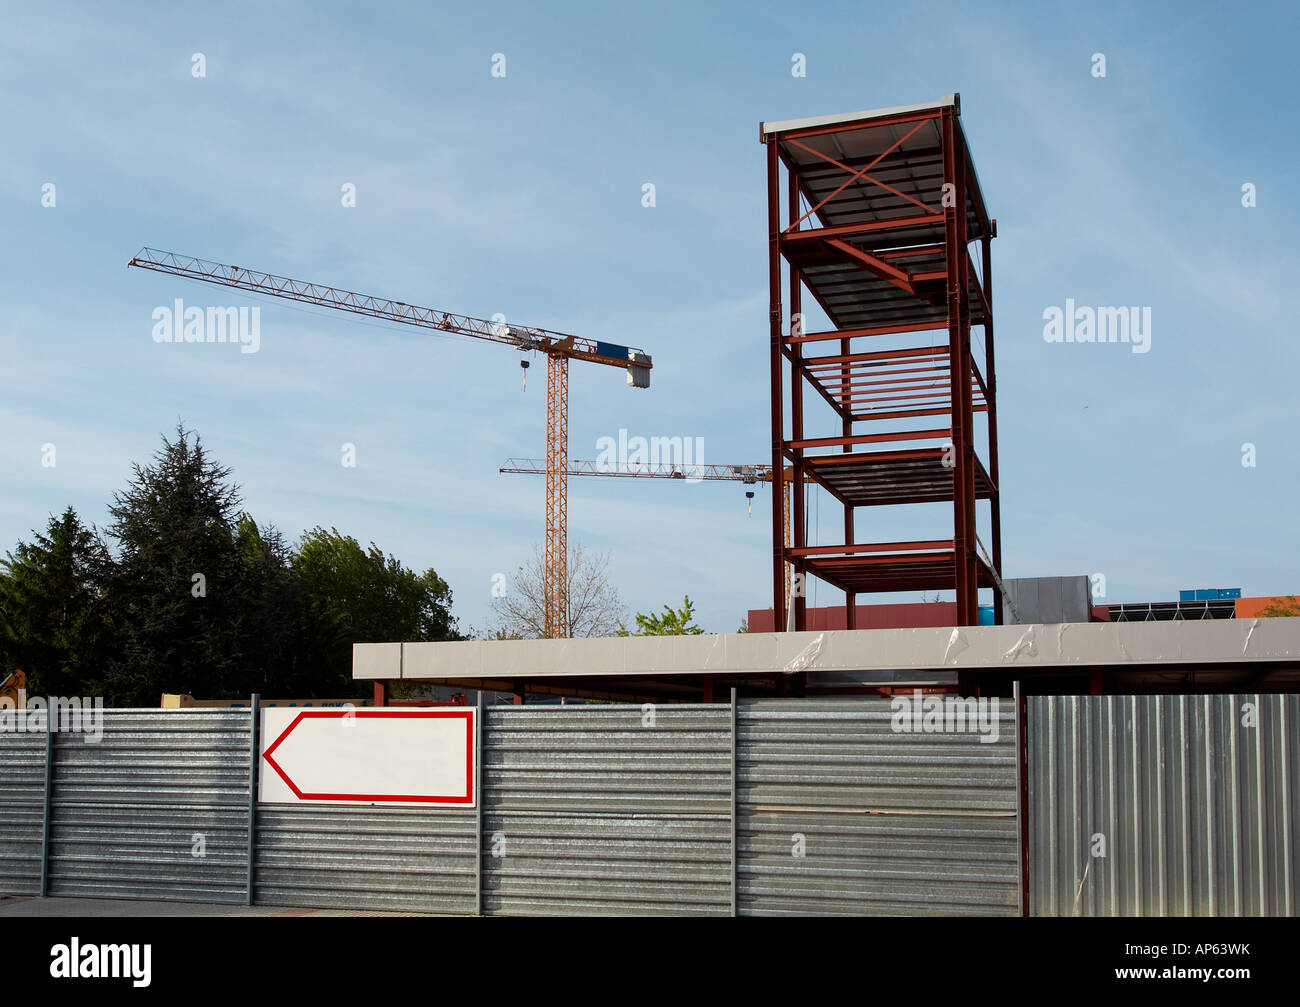 Steel Structure and Construction crane set against a blue sky Stock Photo